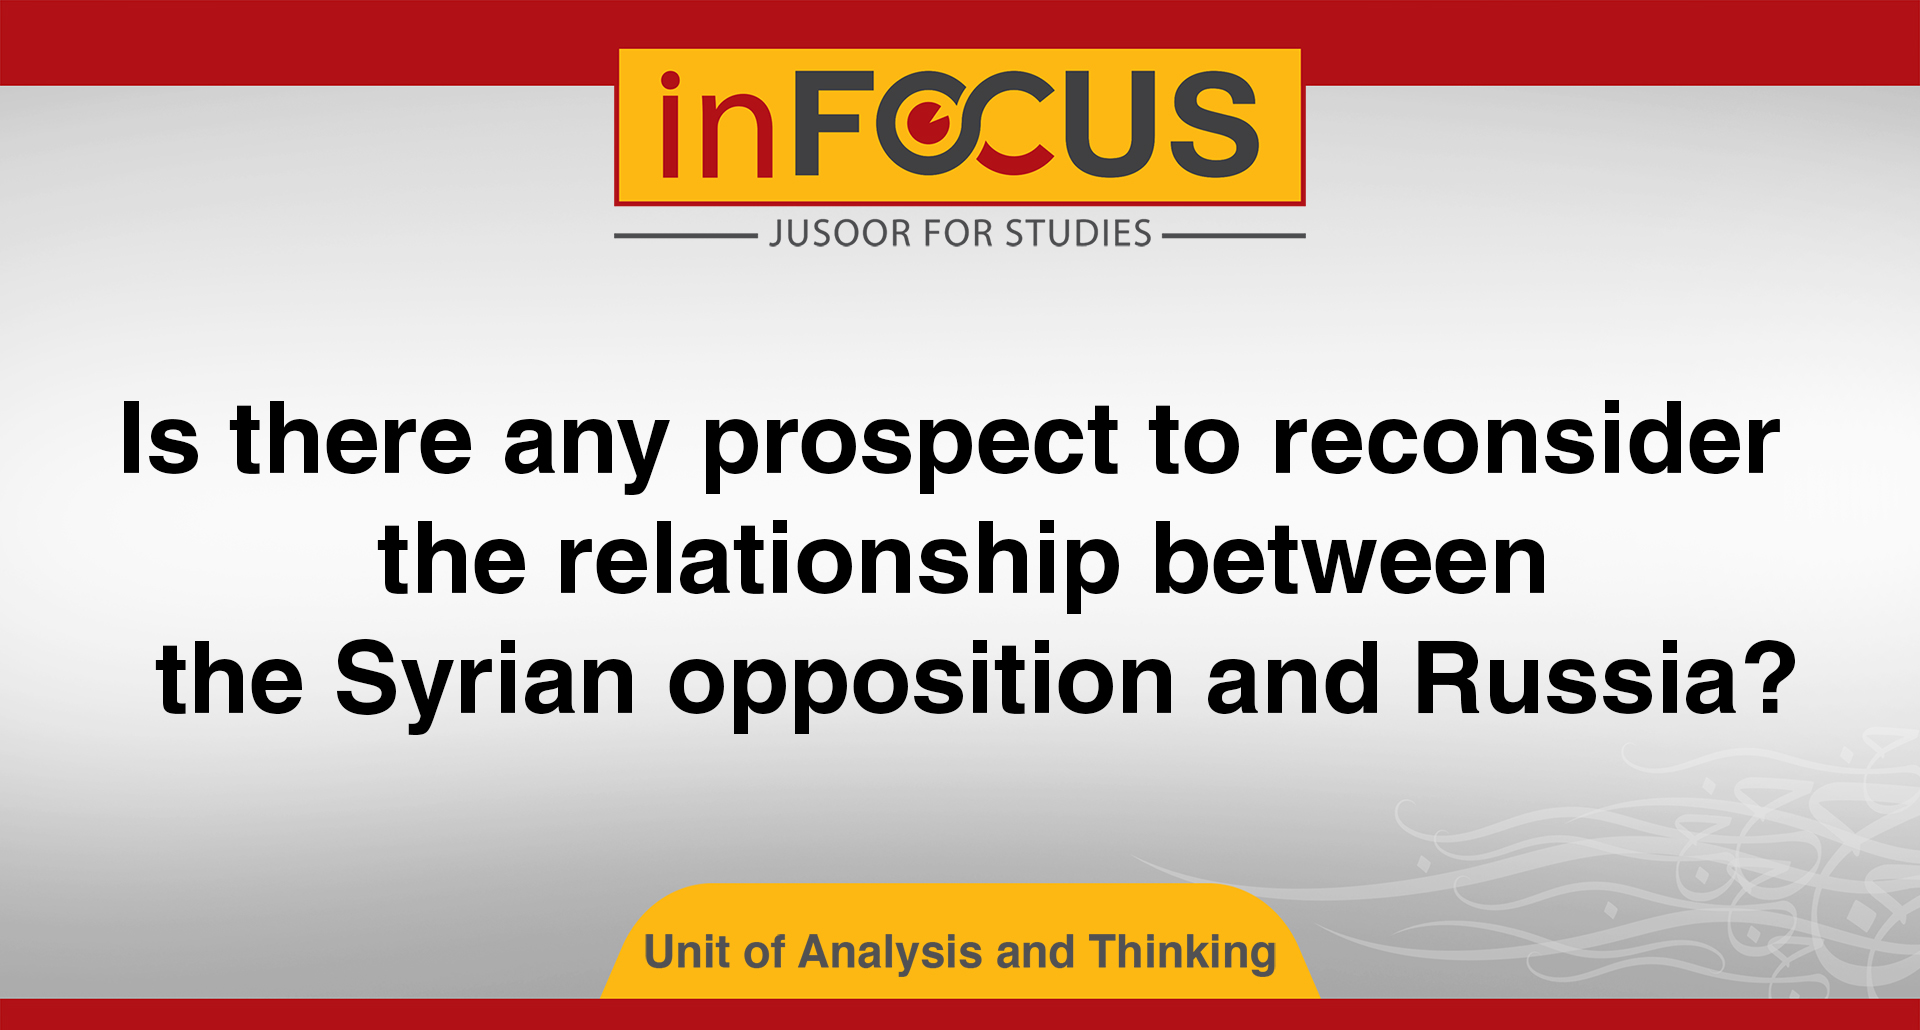 Is there any prospect to reconsider the relationship between the Syrian opposition and Russia?